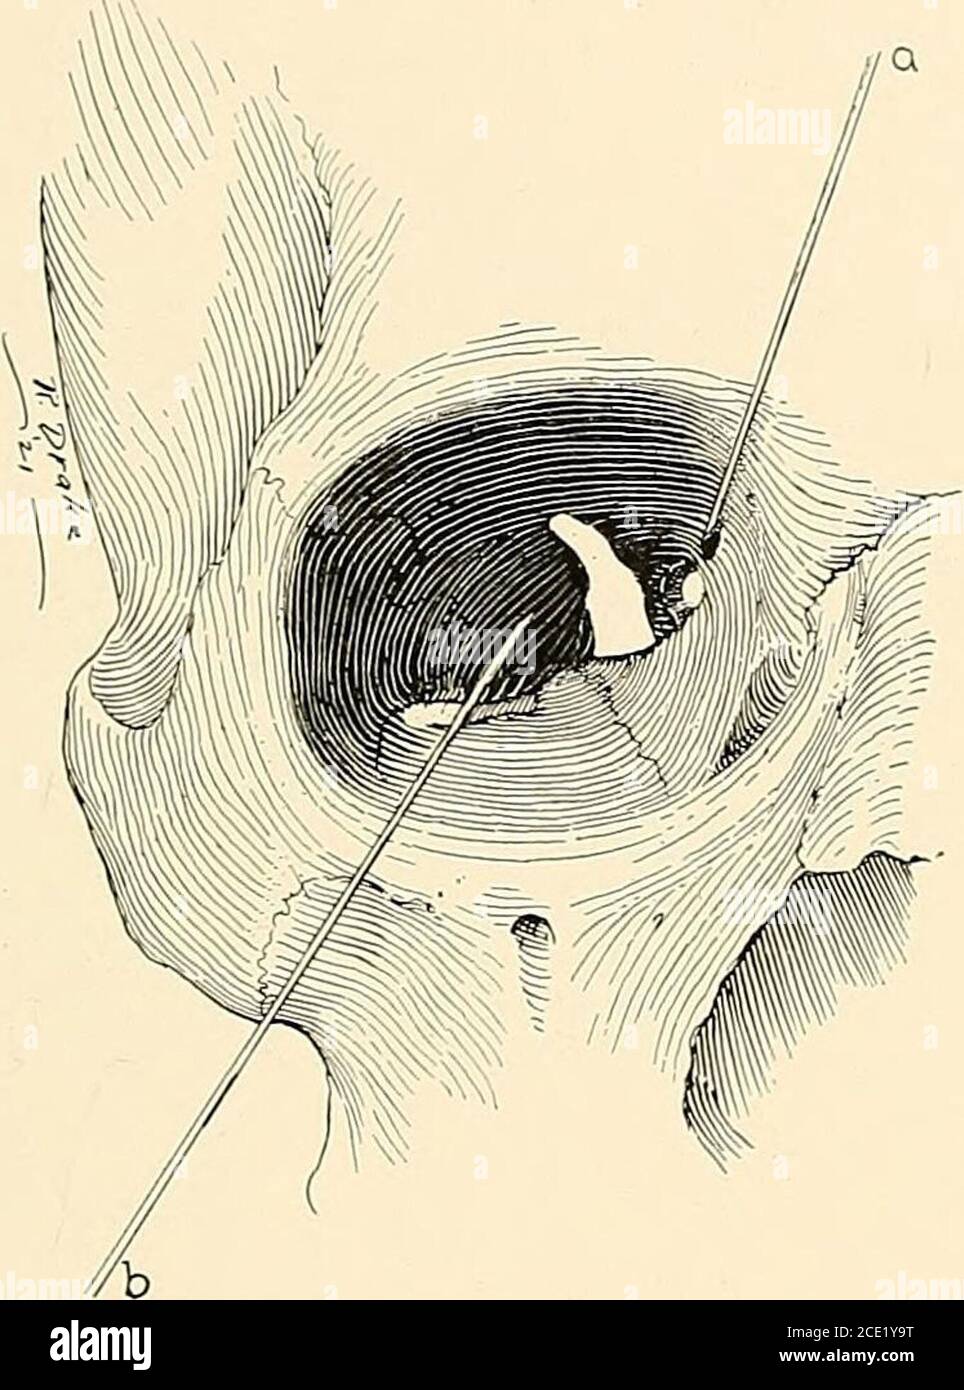 . Regional anesthesia : its technic and clinical application . fijie needle. Medial Orbital Block (Peuckart Route).—Vertically above thecaruncle and a little below the eyebrow, that is to say, at about 1 cm.or one fingerbreadth above the inner canthus (Fig. 40, a), needle No. 2is introduced along the upper medial angle of the orbit, keeping closecontact with the bony surface, until a depth of about 3.5 cm. is reached;2 c.c. of the 2 per cent, solution are then injected. The medial orbital block is ordinarilv associated with the lateral BLOCKING OF CRANIAL NERVES 71 orbital block for operations Stock Photo